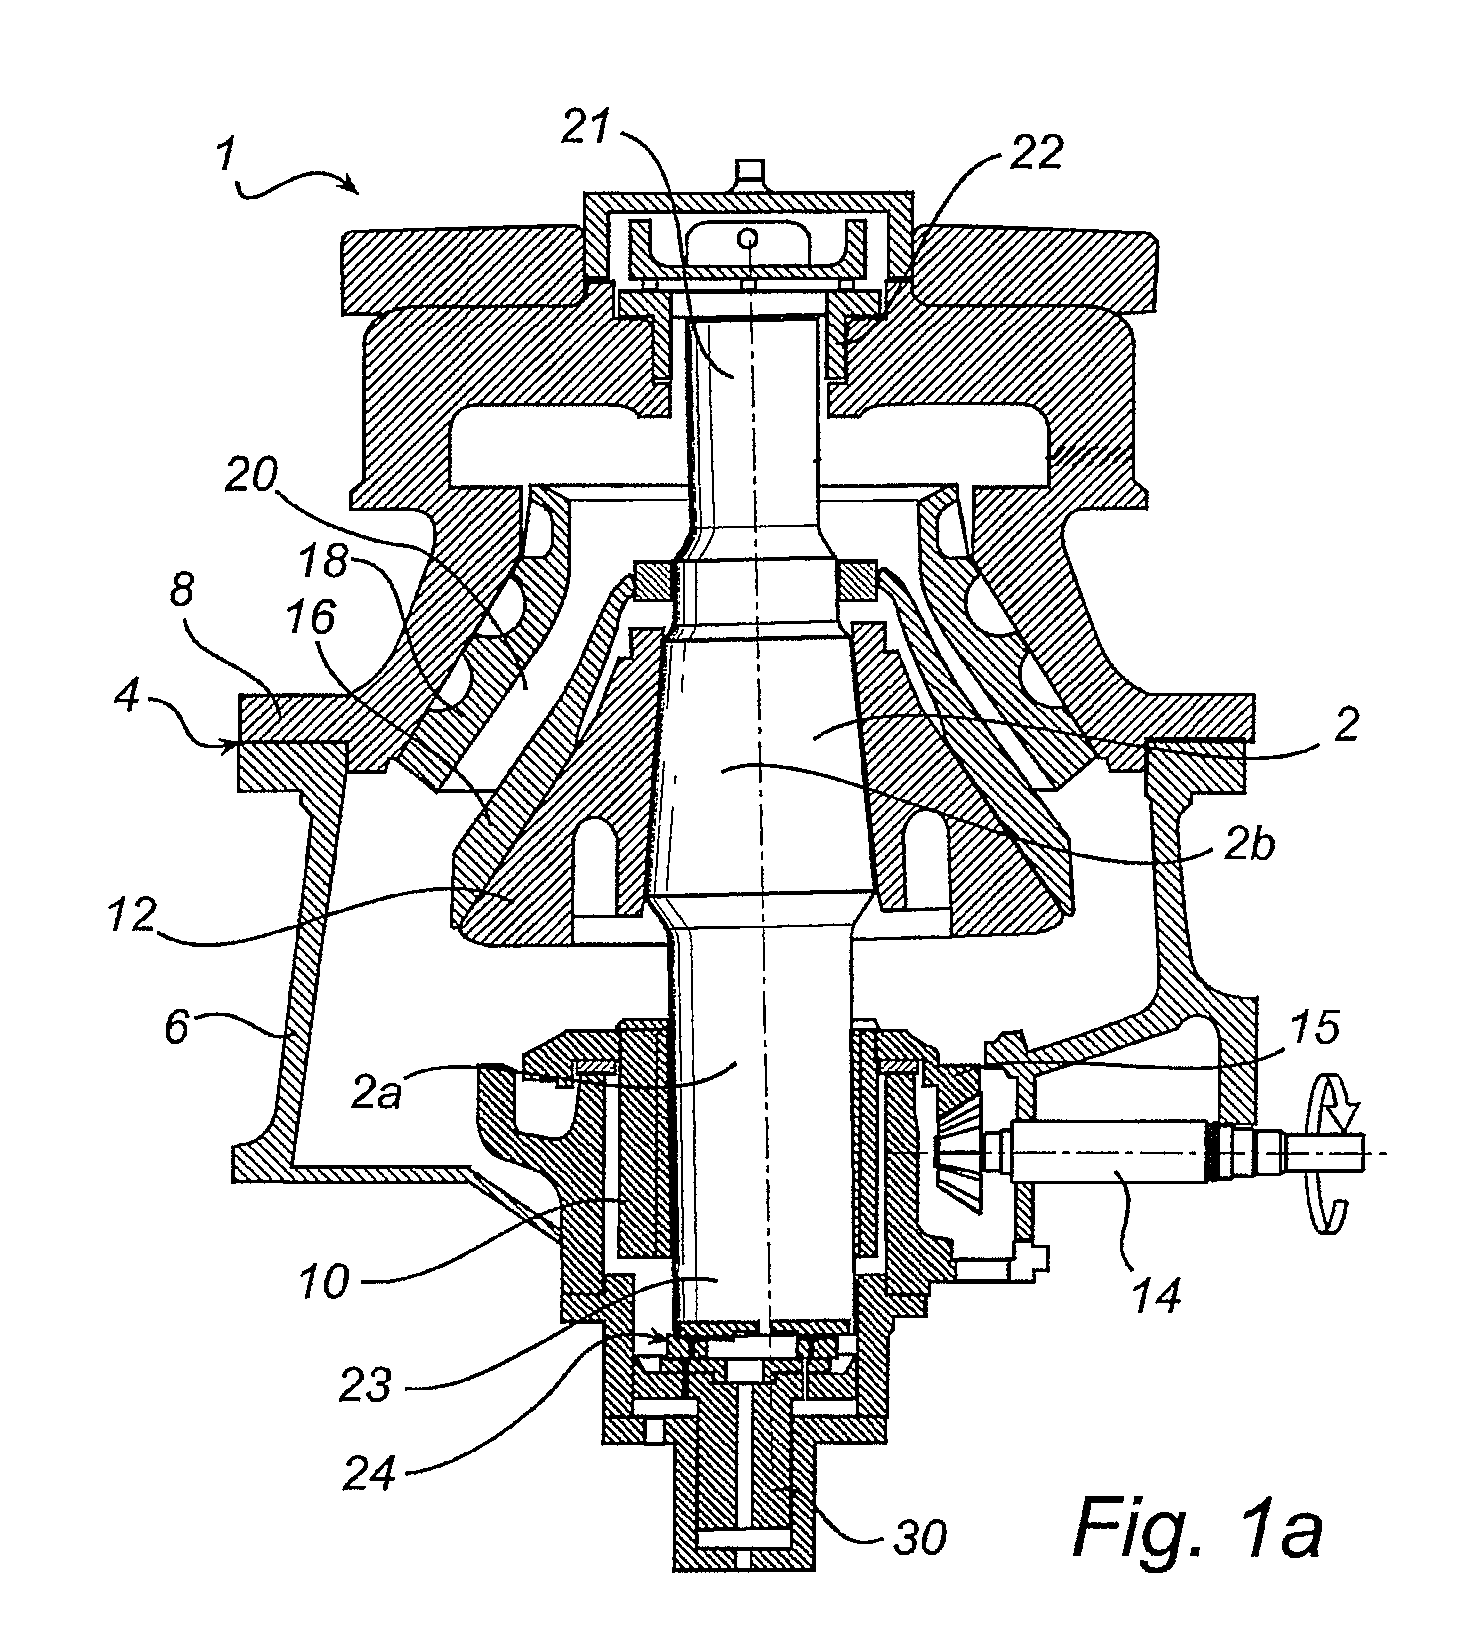 Thrust bearing for a gyratory crusher and method of supporting a vertical shaft in such a crusher